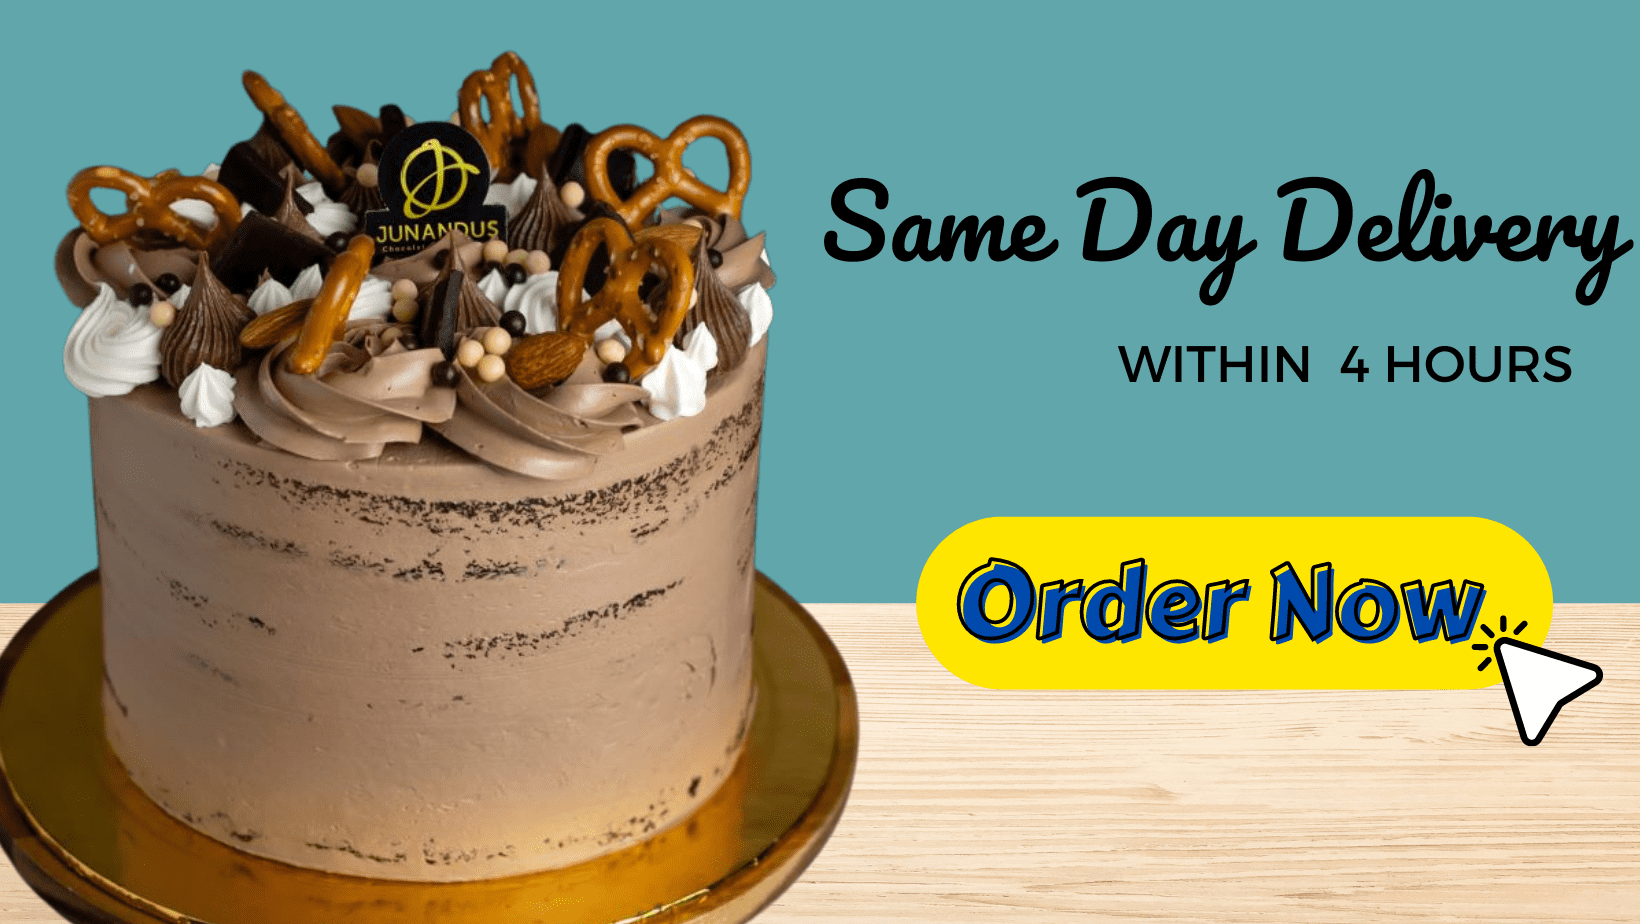 Follow Me To Eat La - Malaysian Food Blog: EAT CAKE TODAY Online Cake  Delivery Shop Delivers Fresh Cakes In 4 Hours